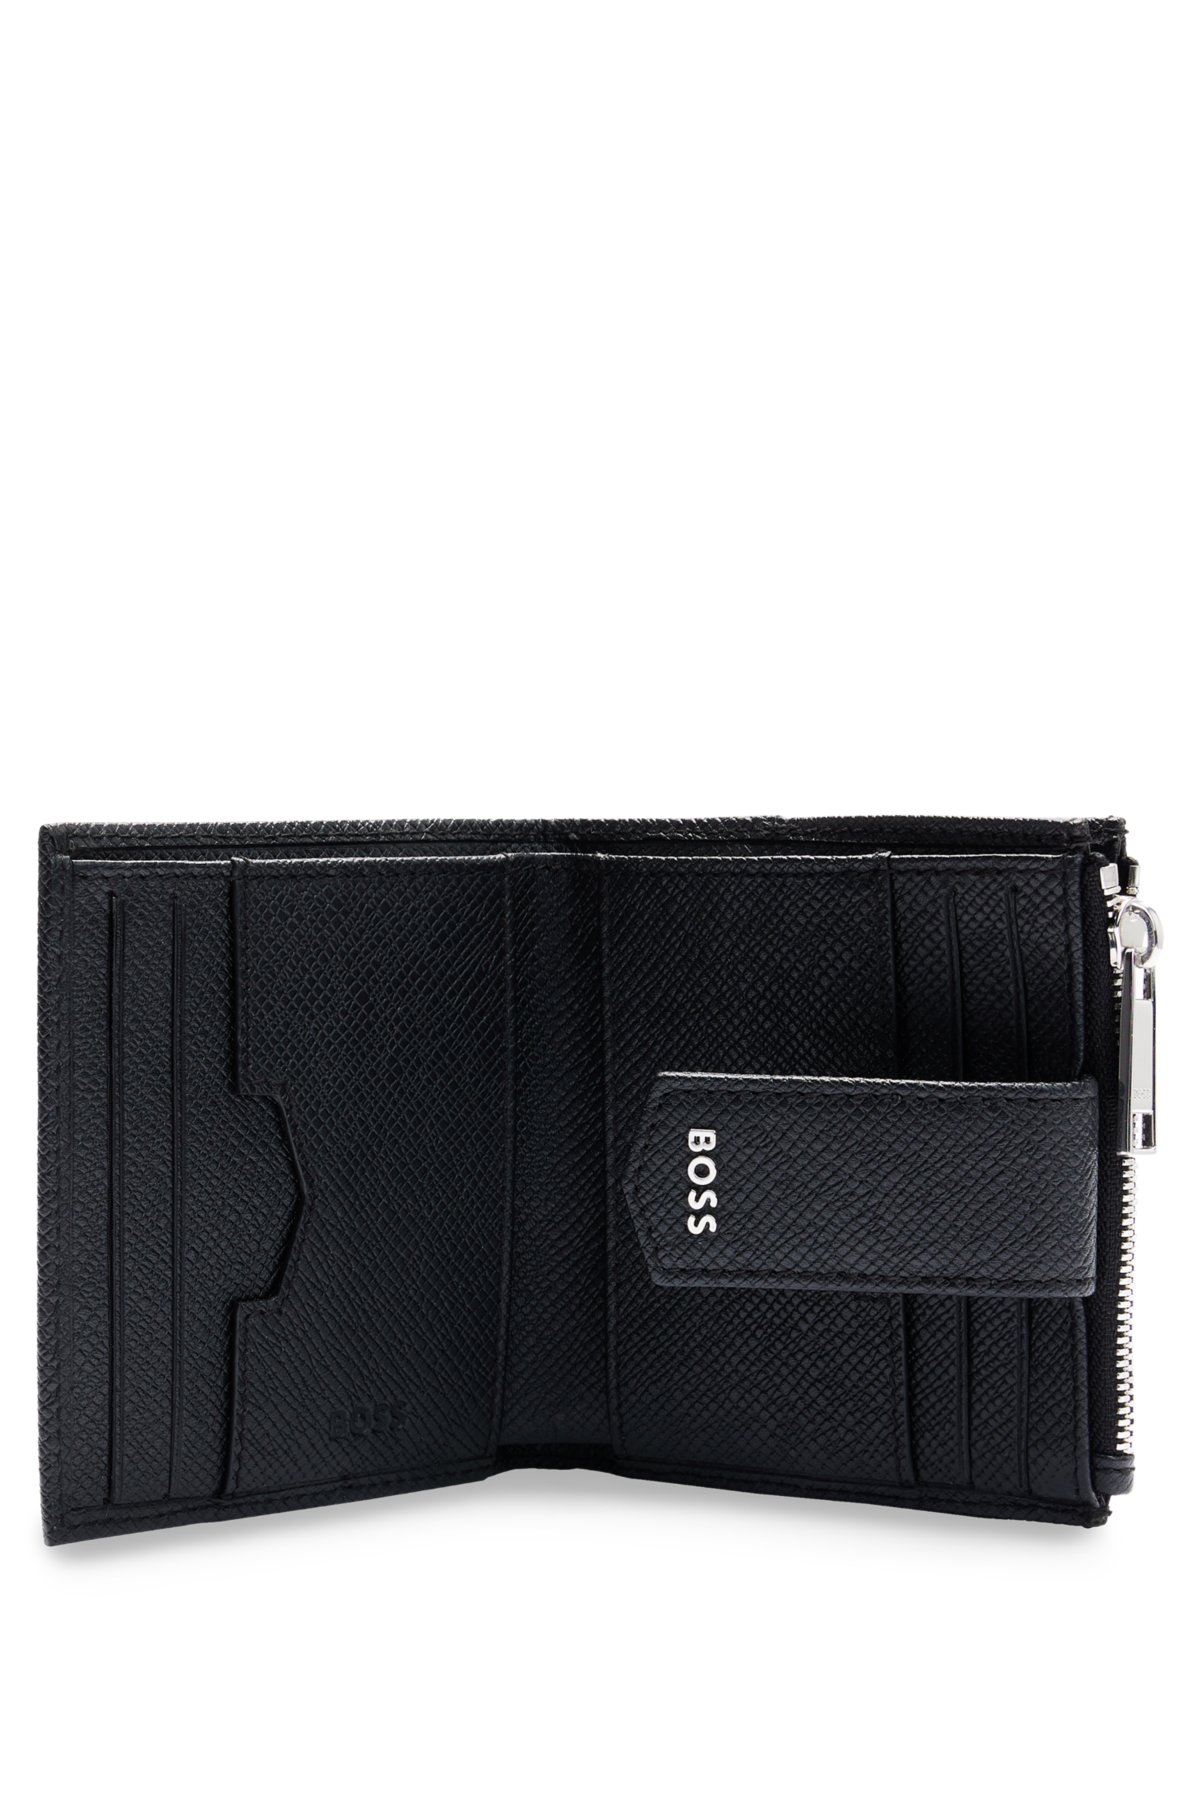 Embossed-leather wallet with polished silver hardware, Black